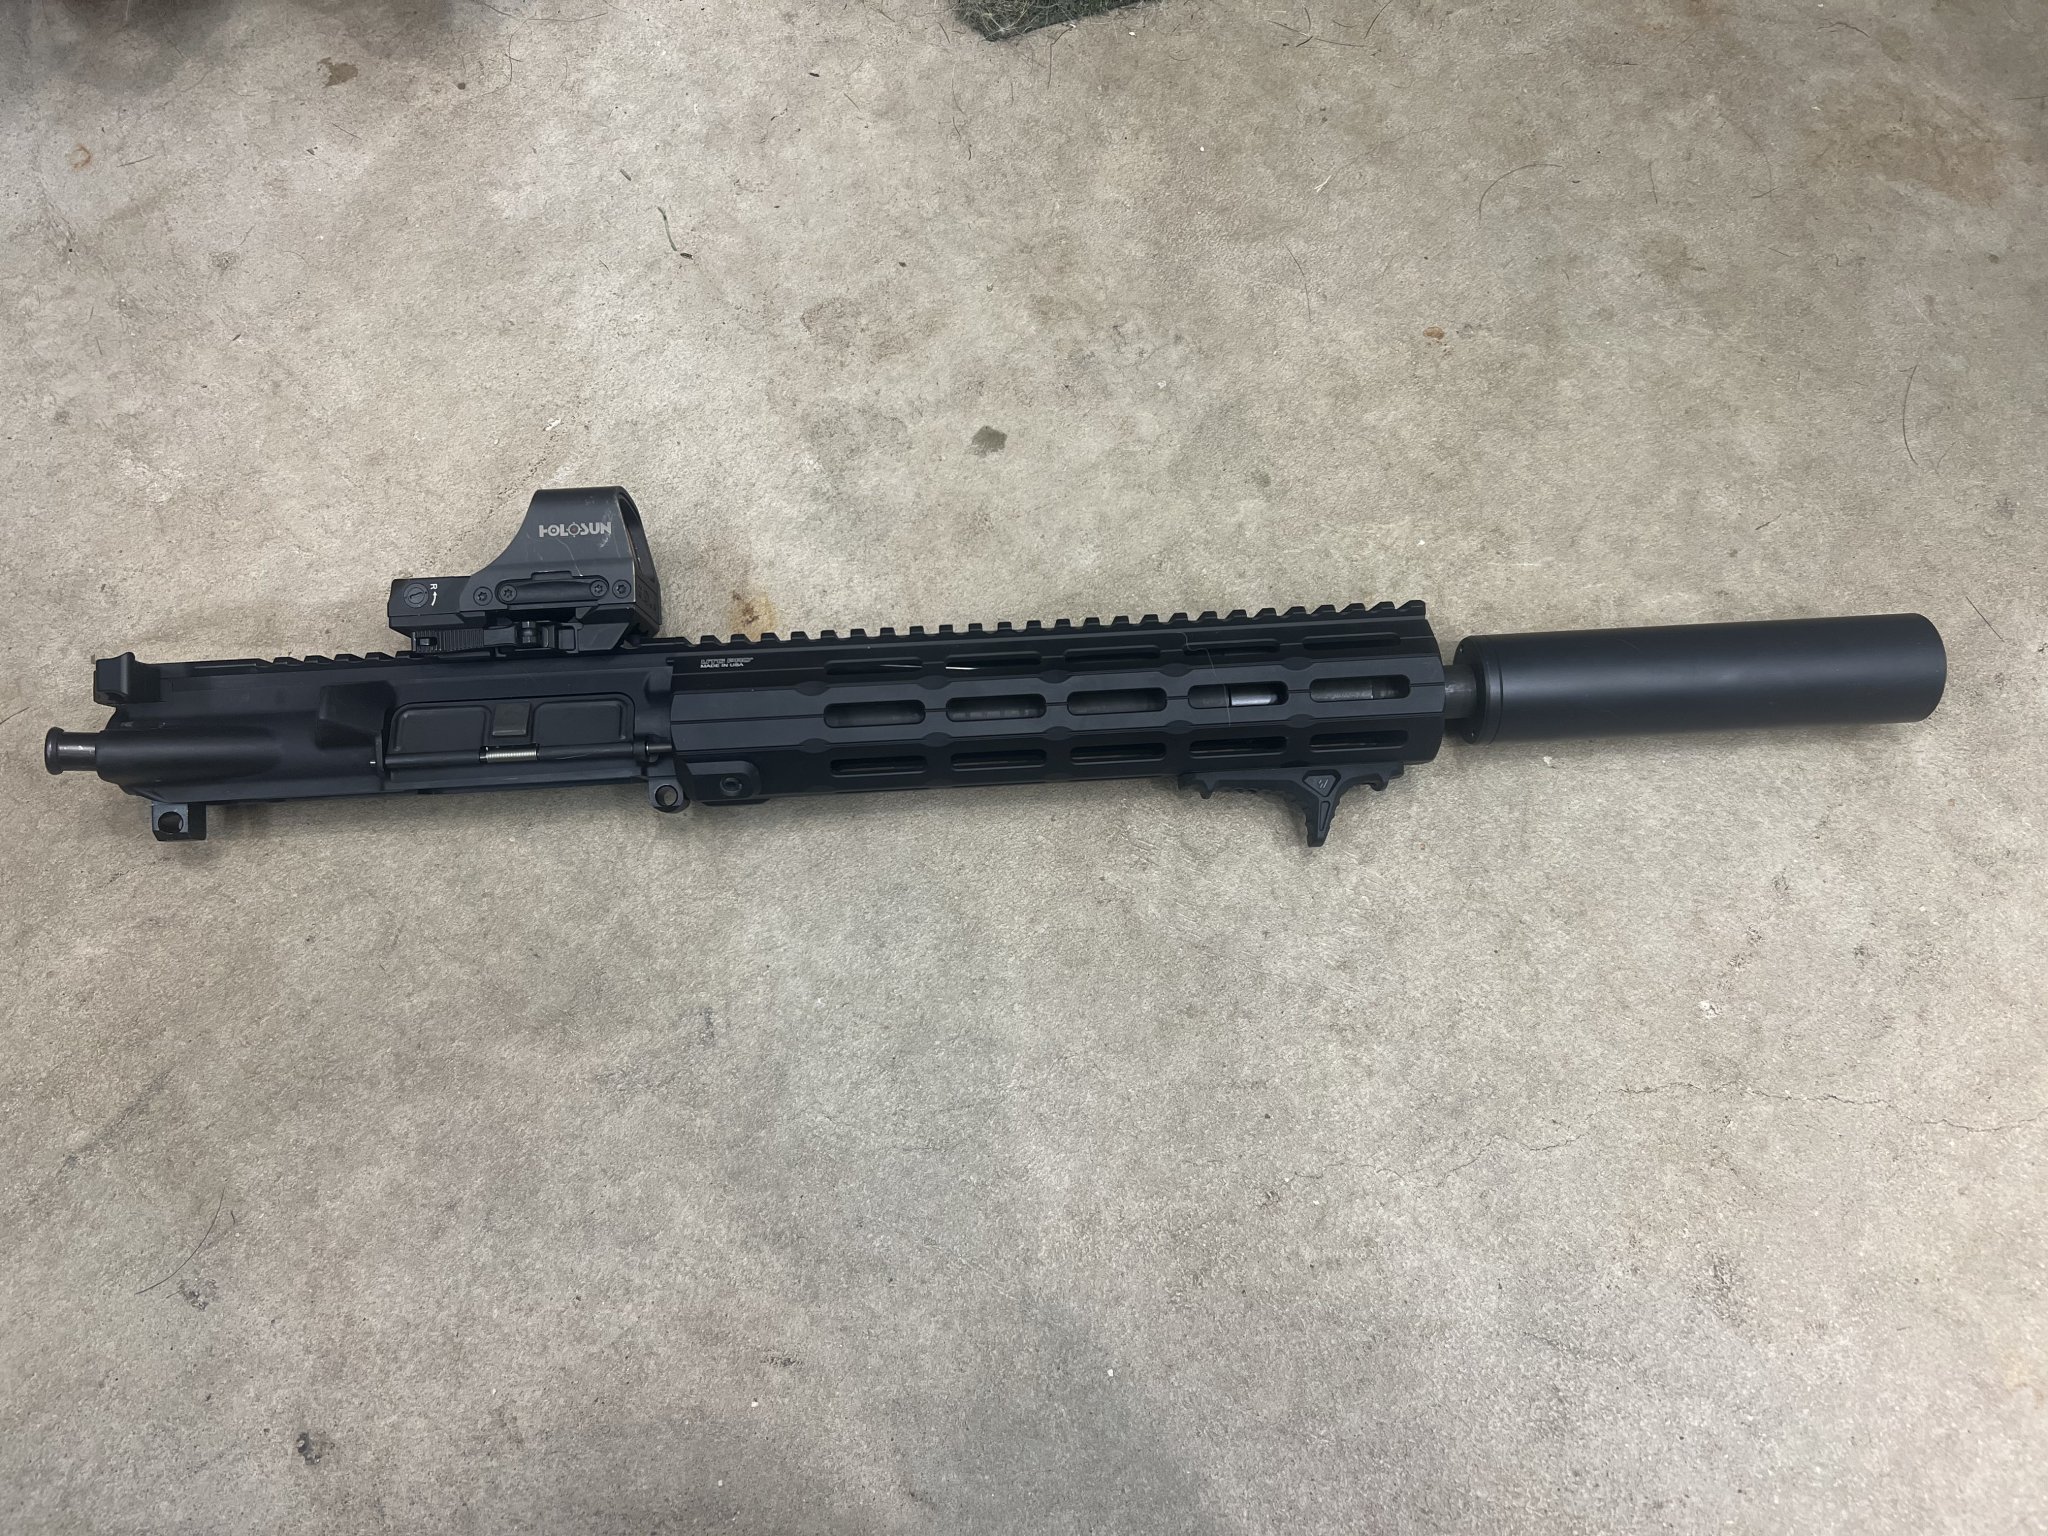 Accessories - Colt 11.5” upper with new BCG | Sniper's Hide Forum